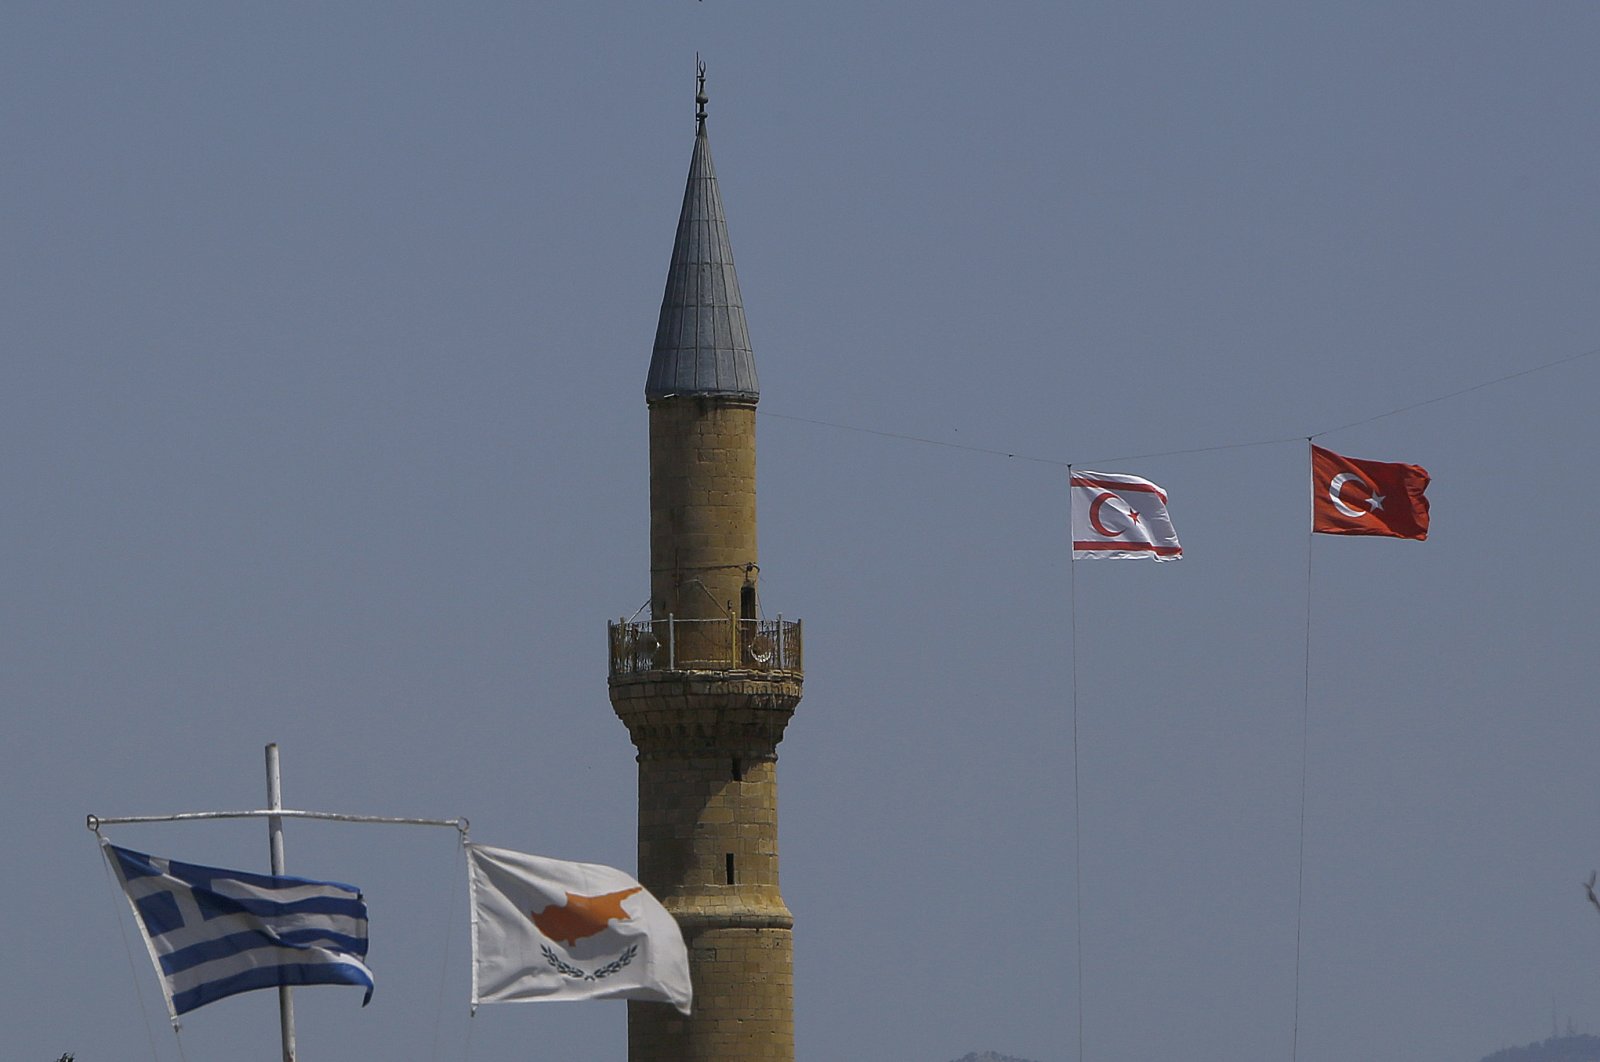 The flags of Turkey and the TRNC flutter by the minaret of the Hagia Sofia with the flags of Greece and Greek Cyprus on poles below, in the divided capital Lefkoşa, TRNC, April 26, 2021. (AP File Photo)